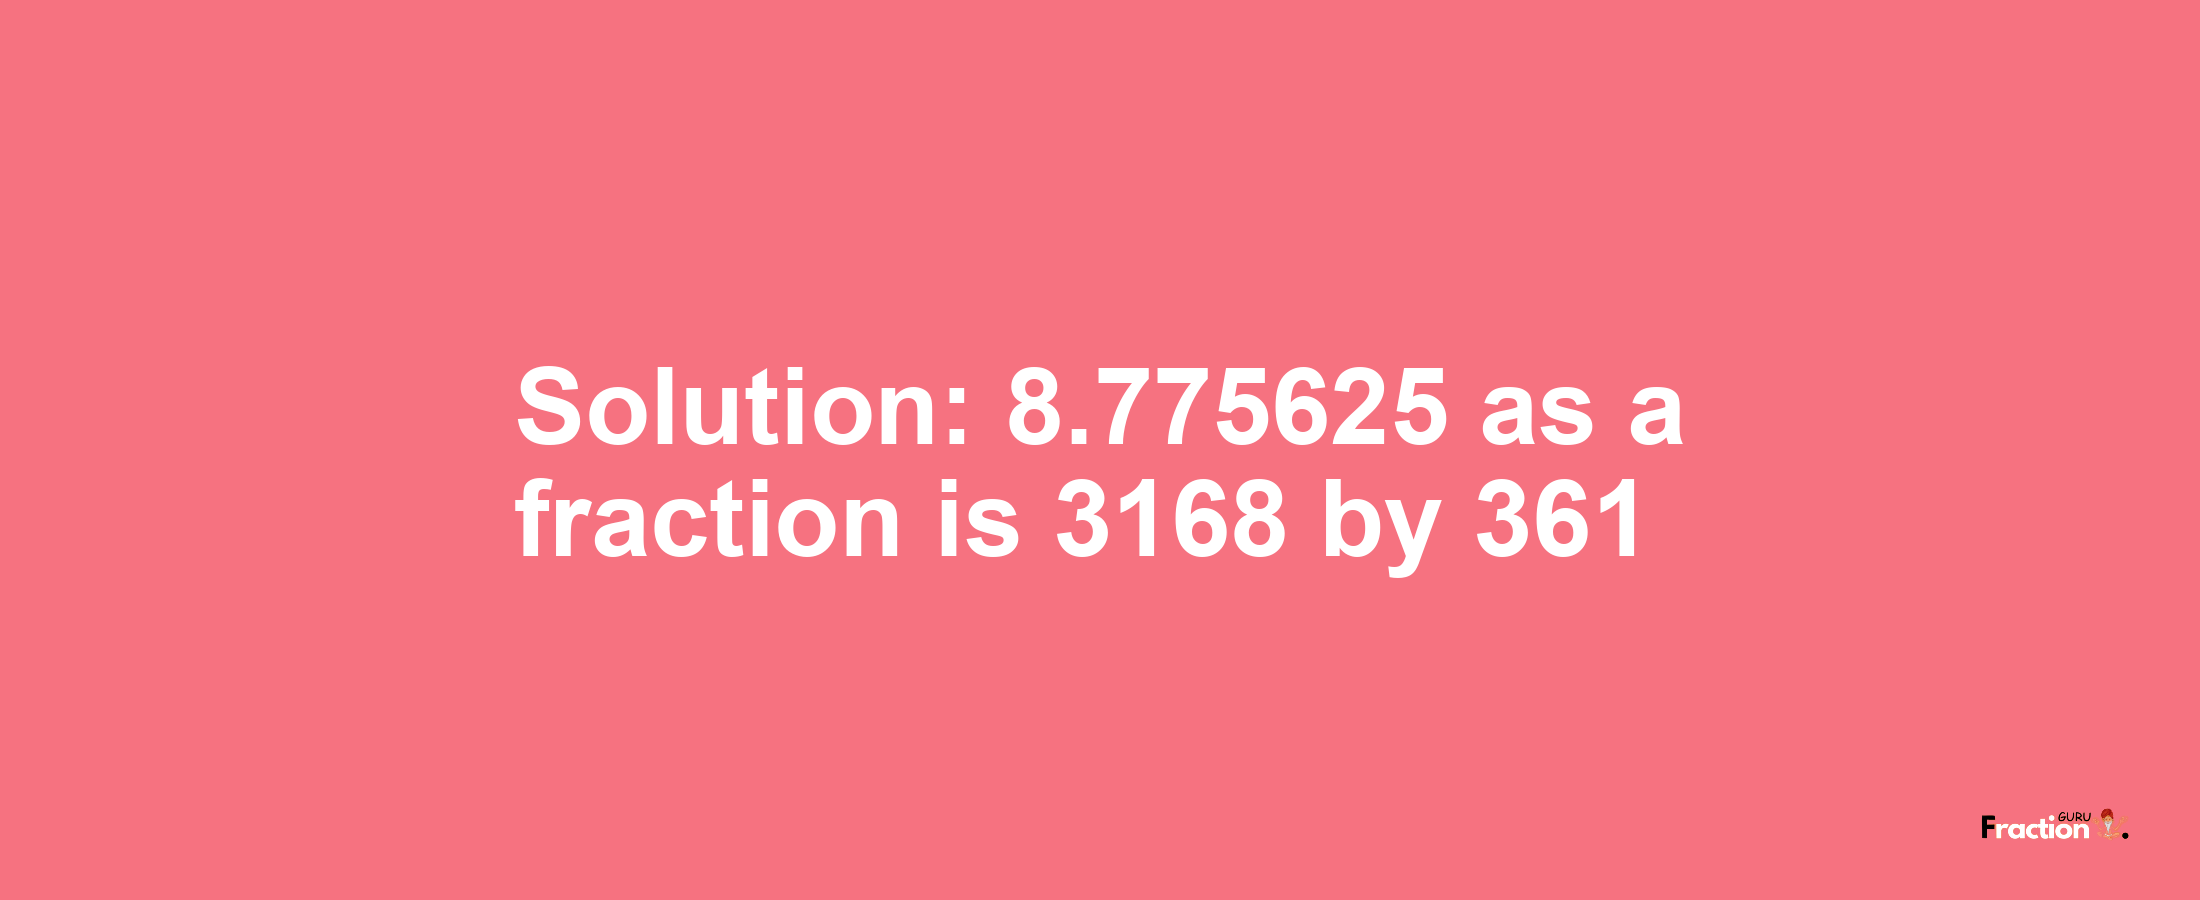 Solution:8.775625 as a fraction is 3168/361